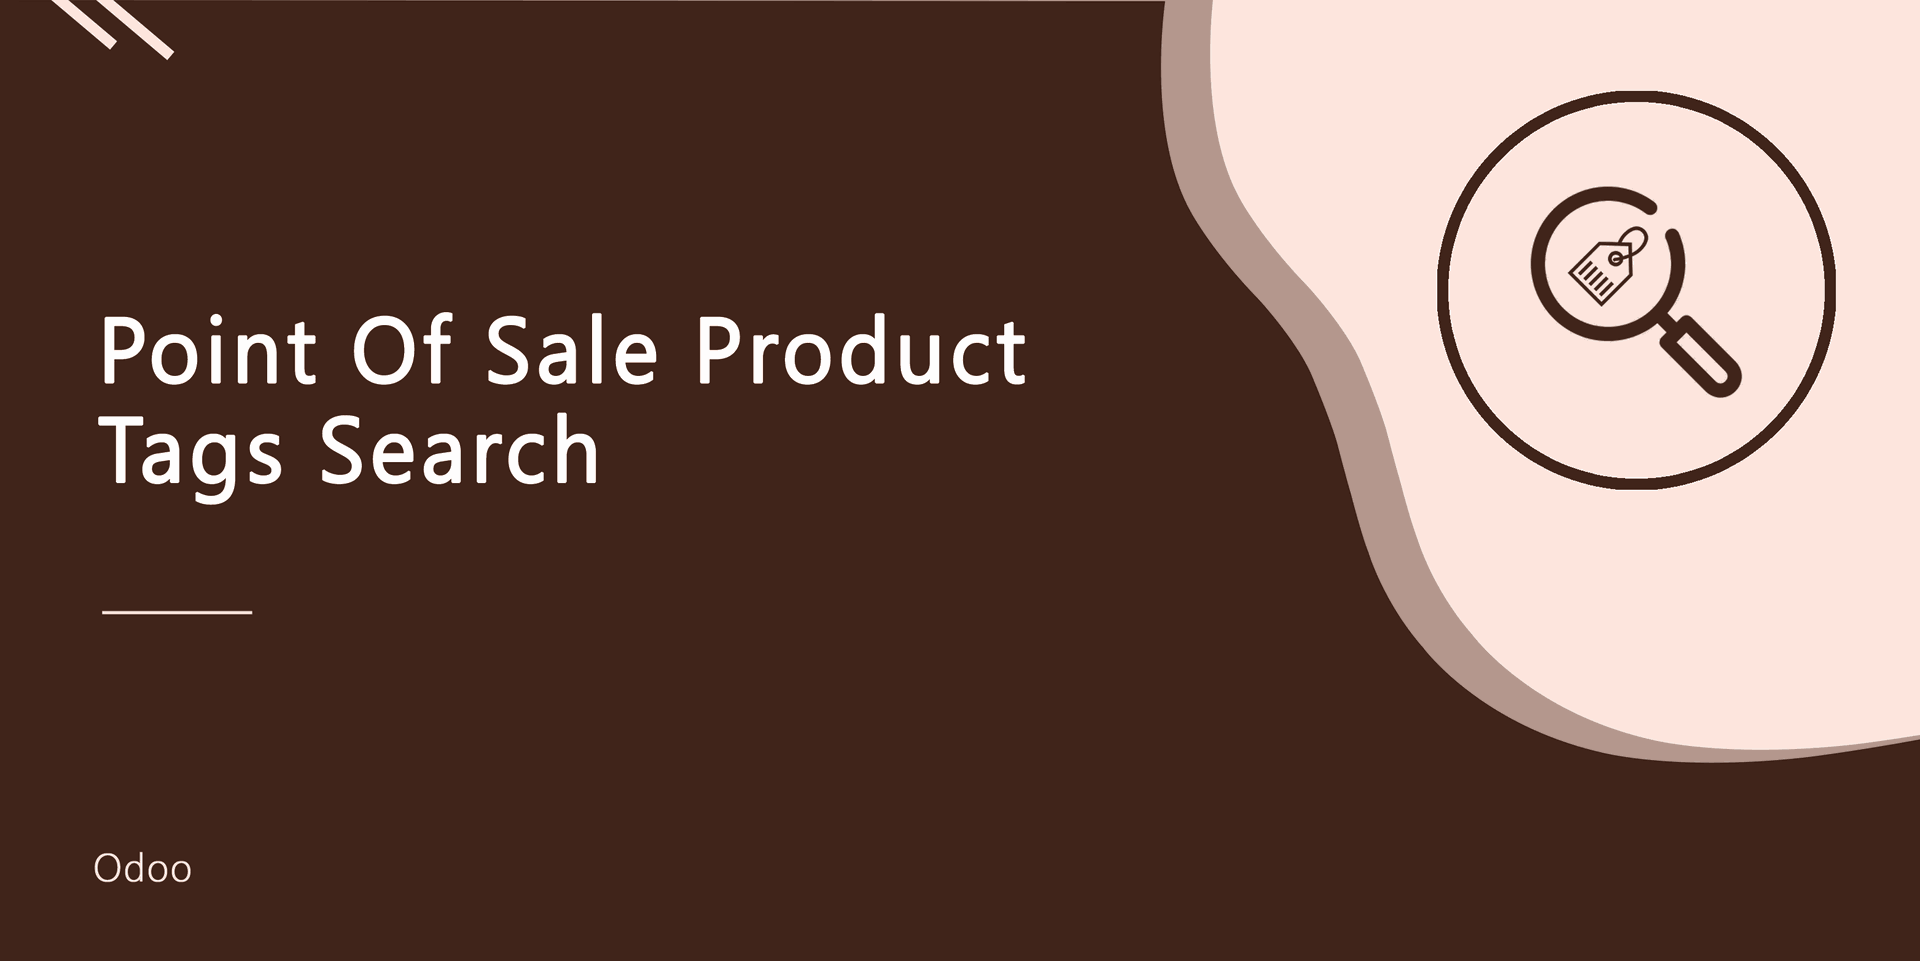 Point Of Sale Product Tags Search